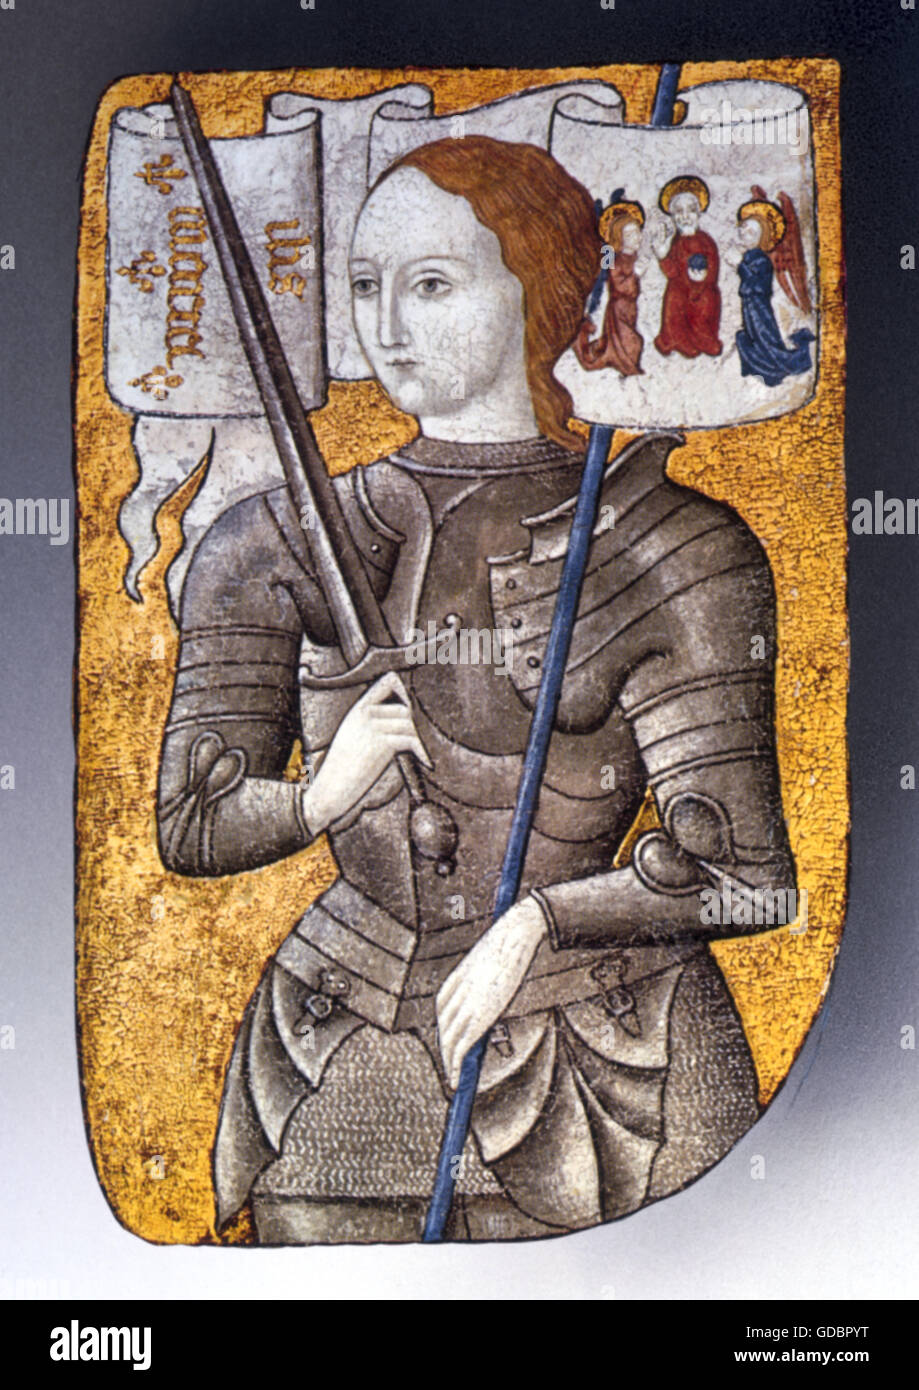 Joan of Arc, 6.1.1412 - 30.5.1431, French national hero, half length, Scutum painting, 15th century, Louvre Paris, name and monogram of Virgin Mary and Christus, three lilies, God the Father and two angels, Stock Photo